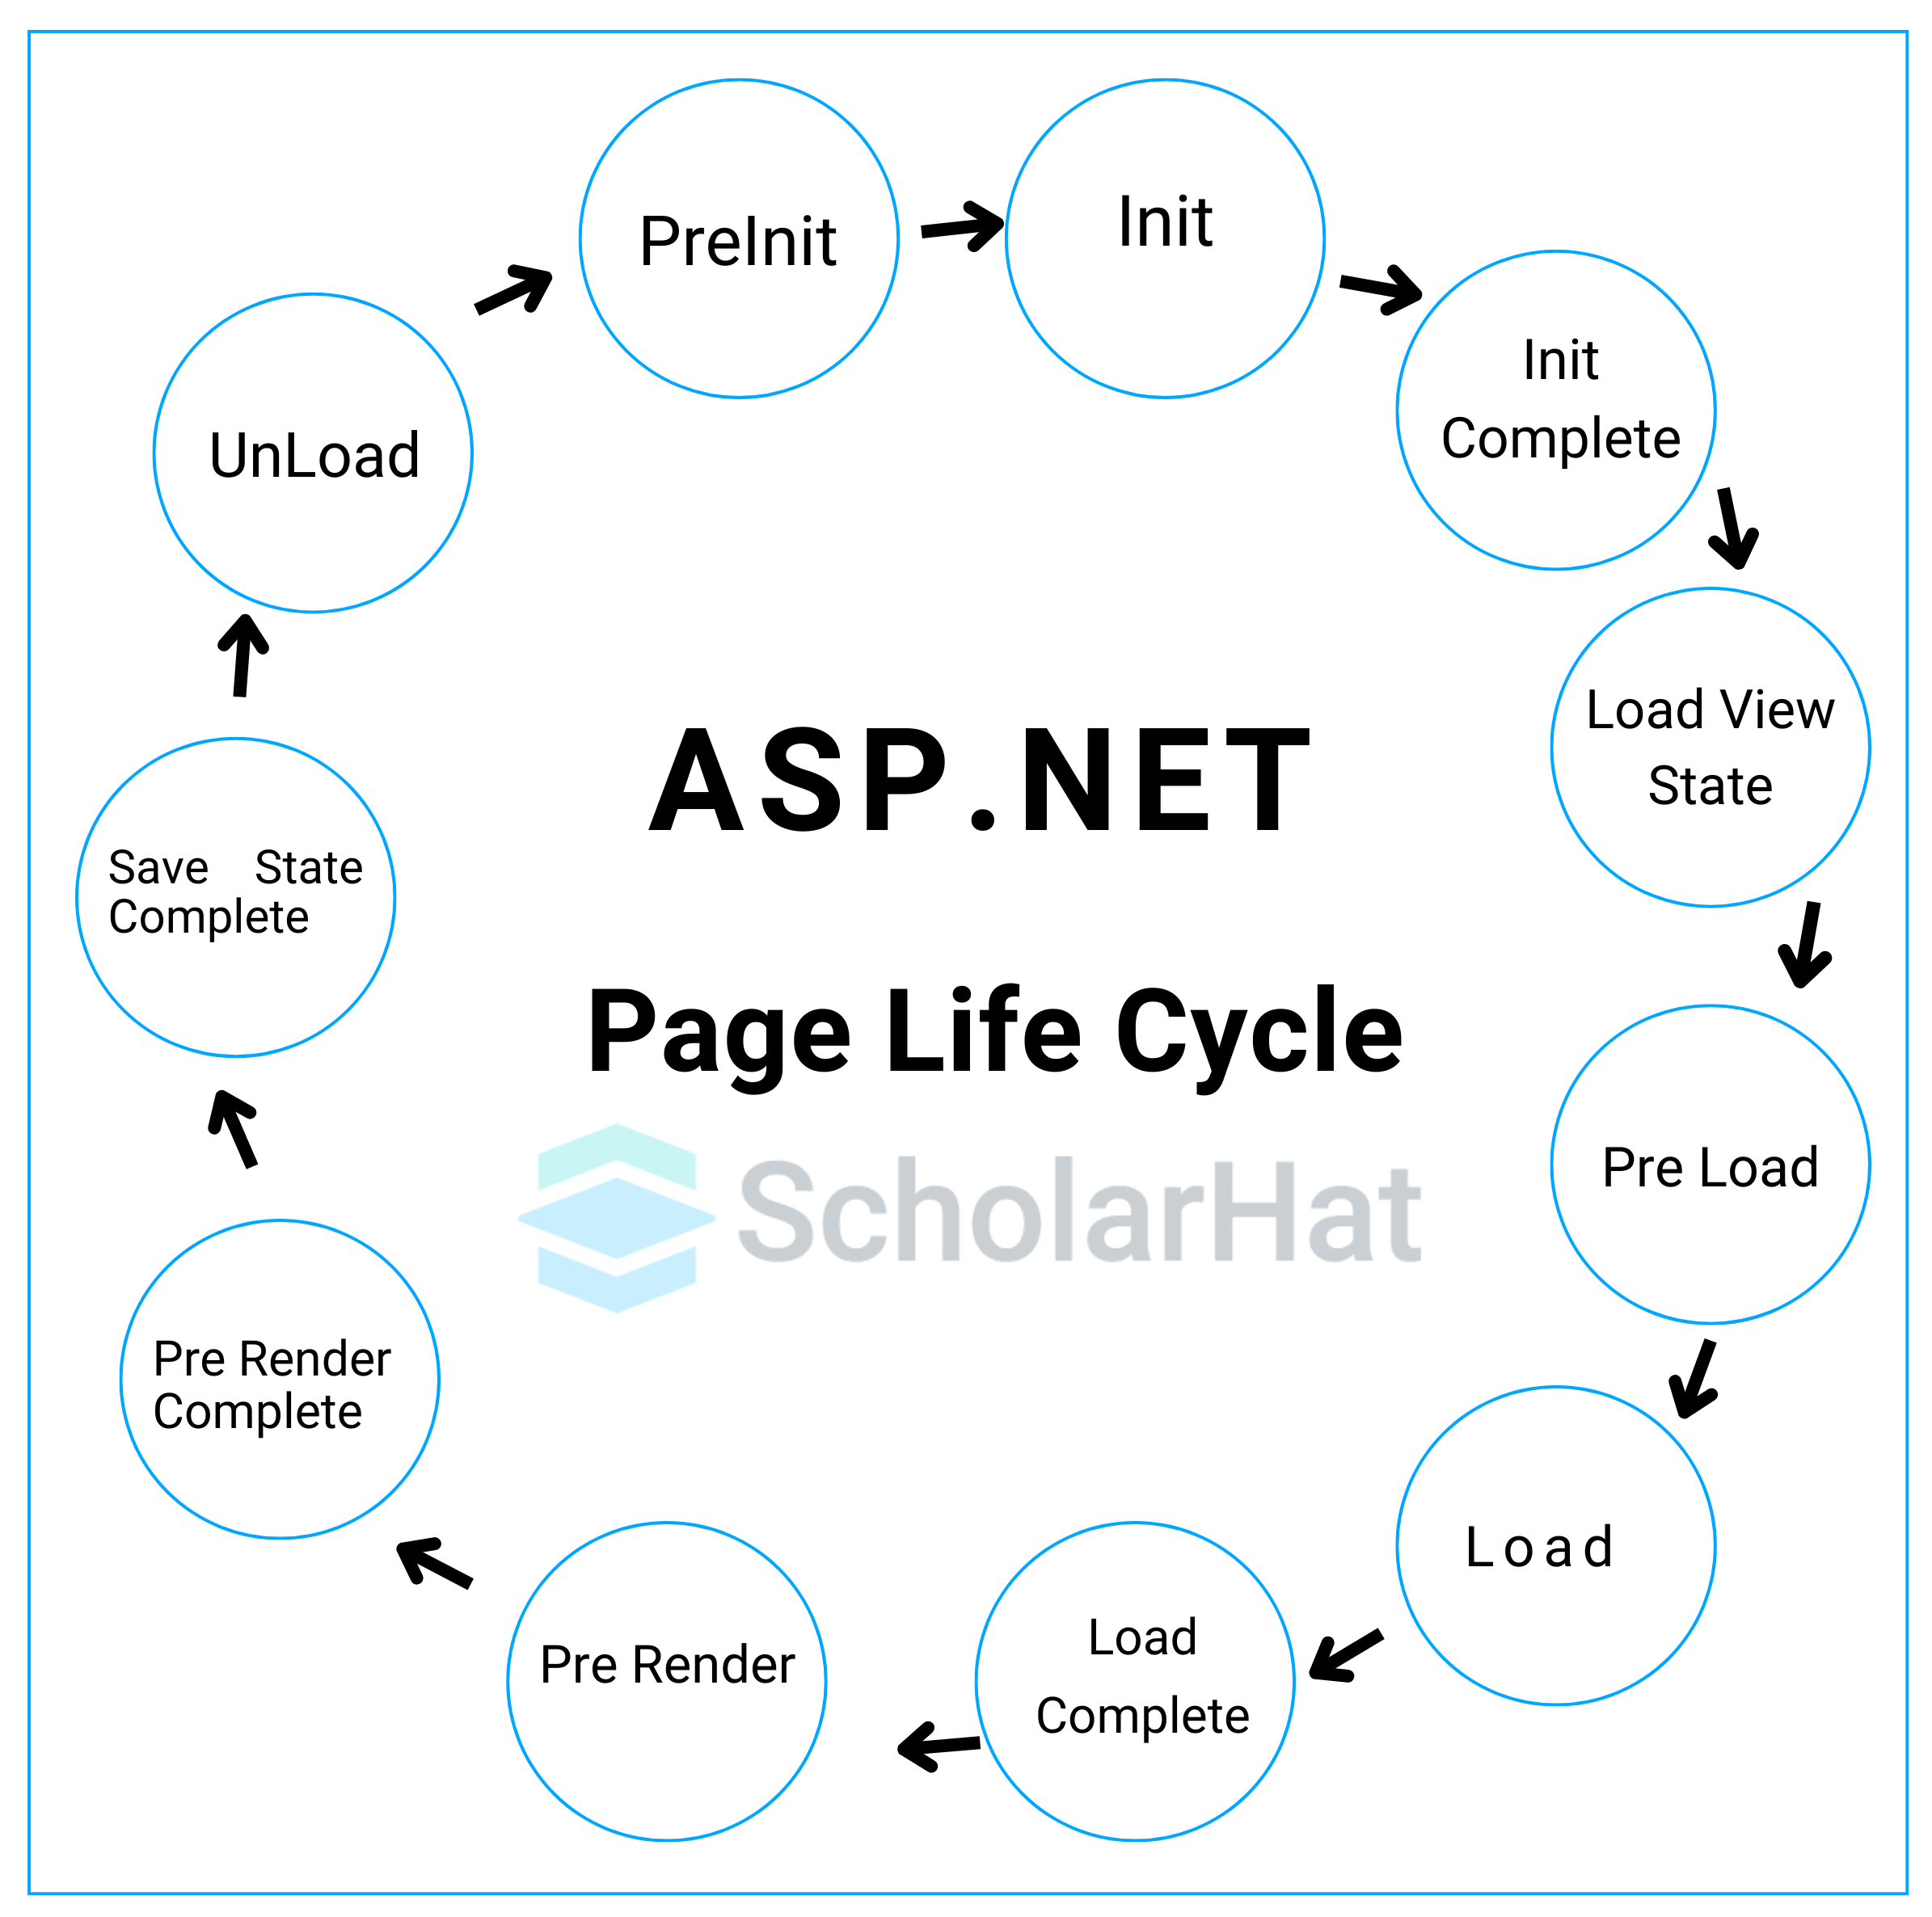 Different ASP.NET Page Life Cycle Events